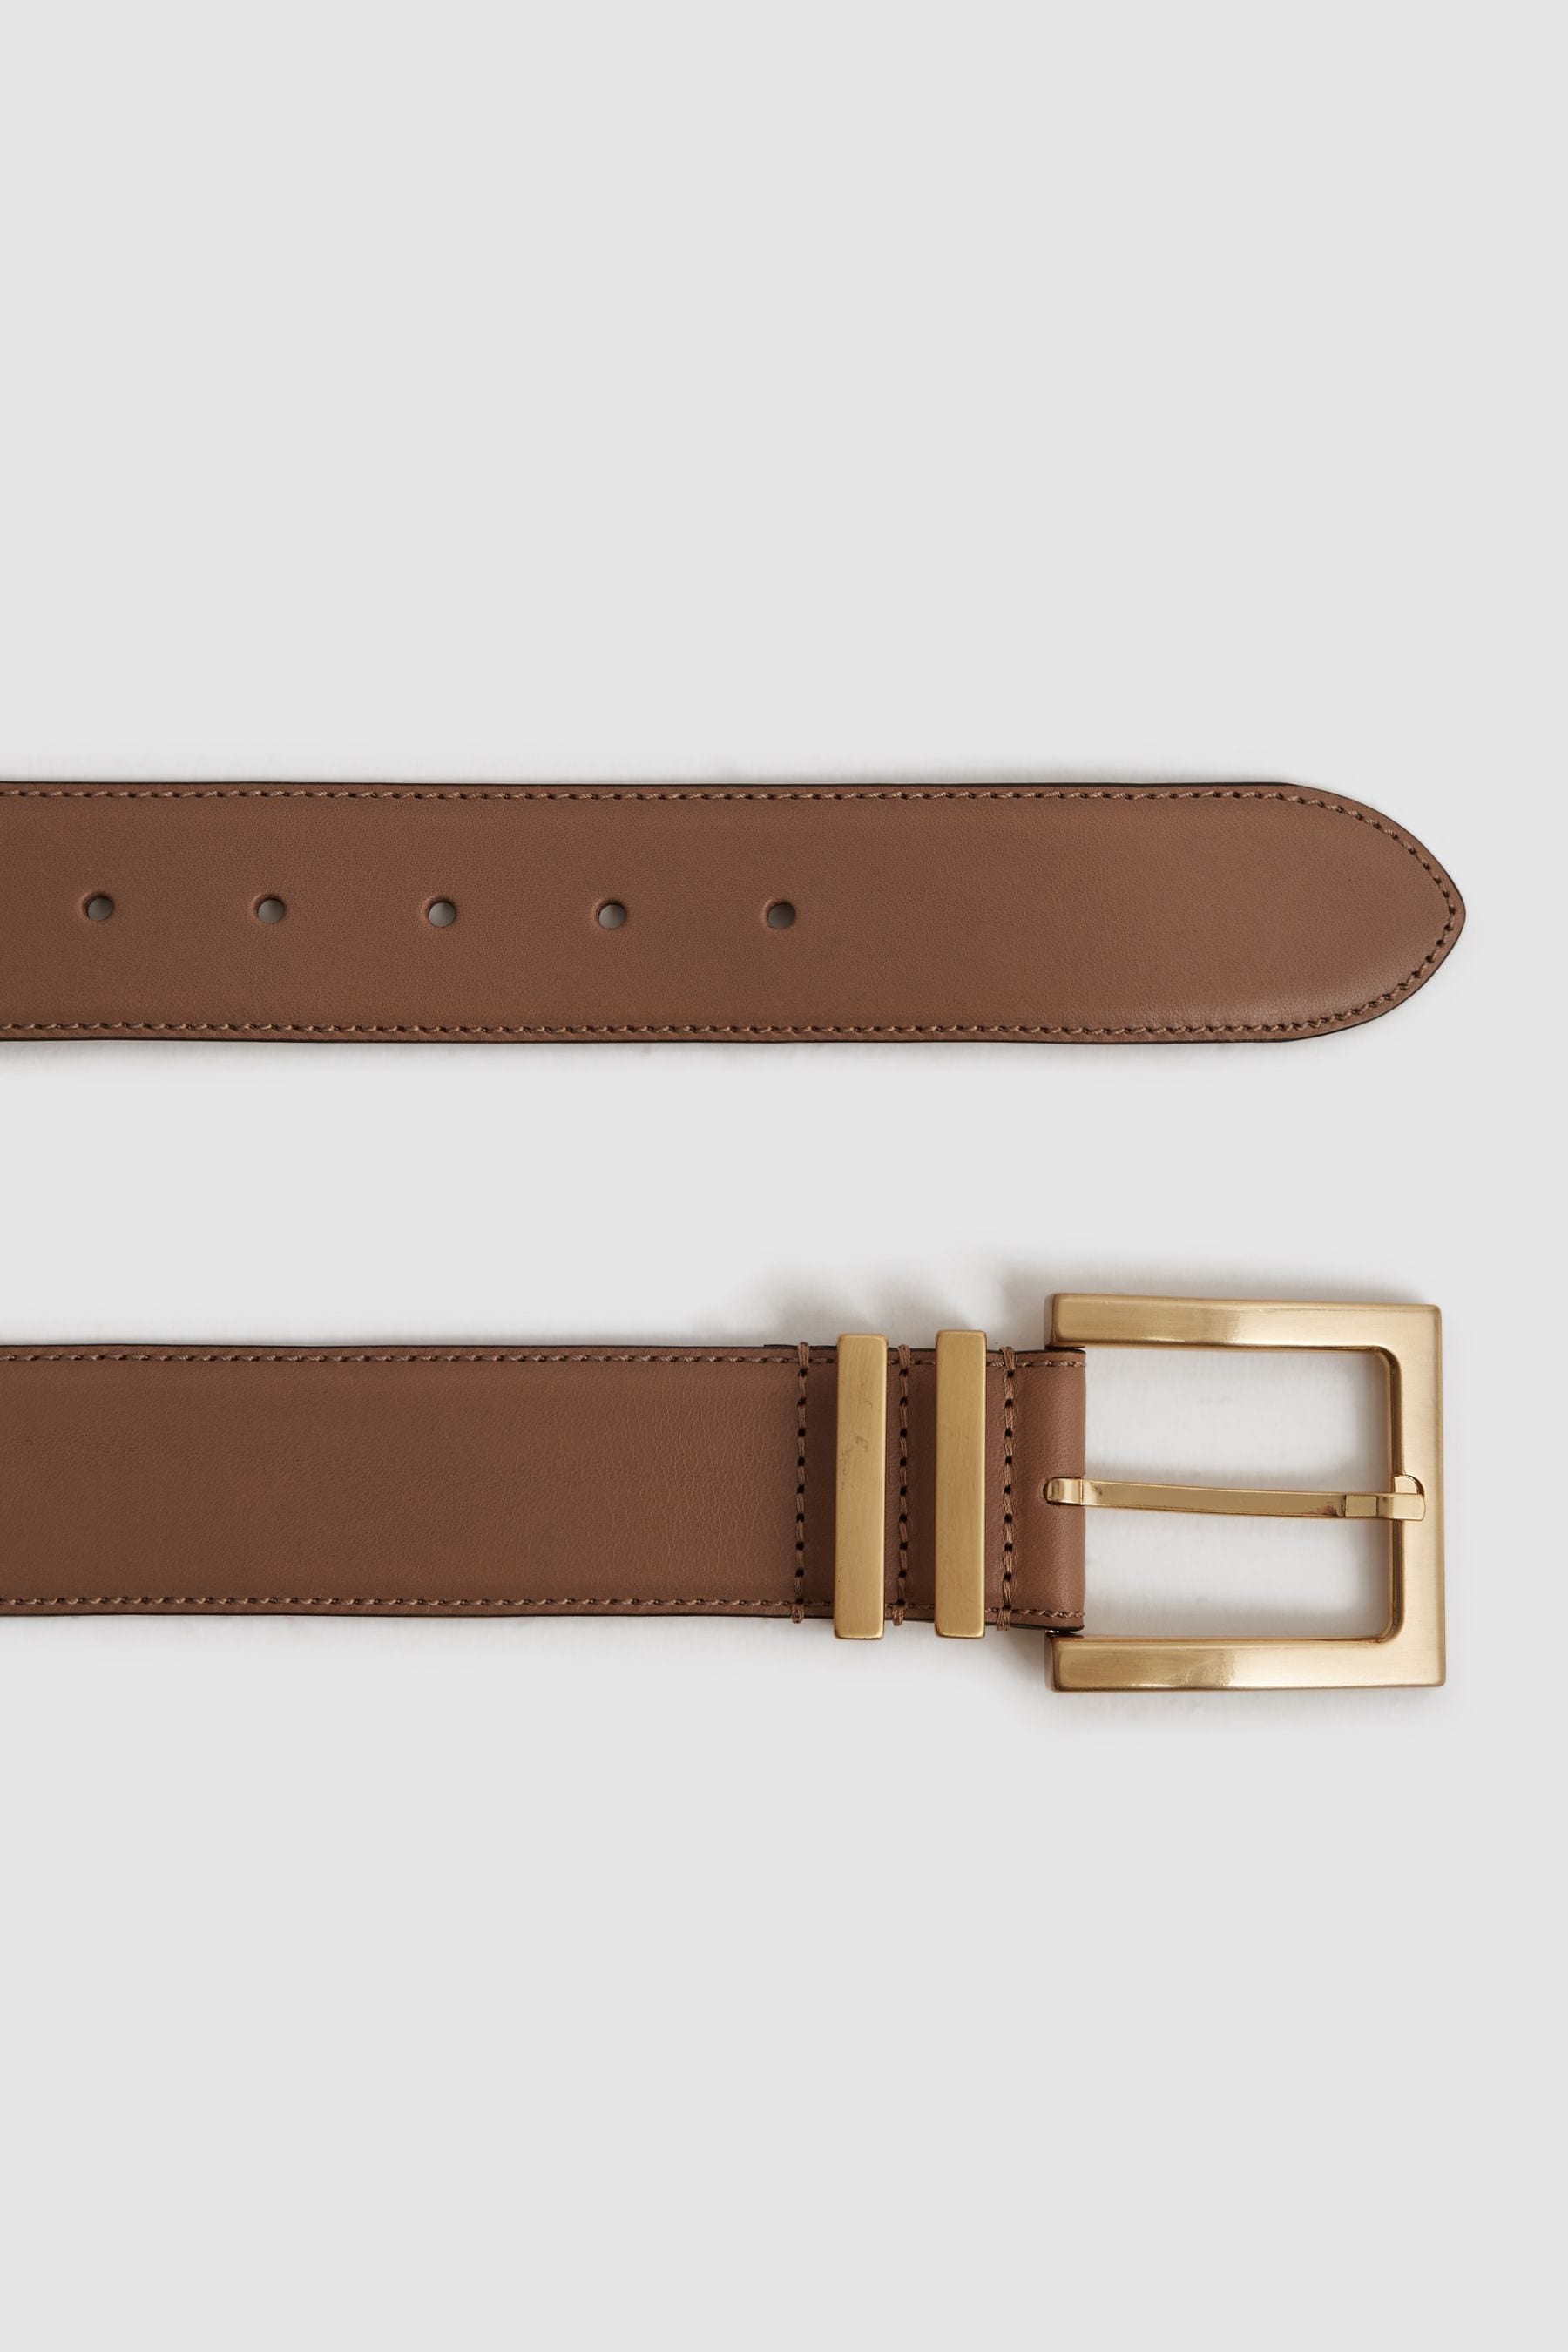 Buy Reiss Camel/Taupe Brompton Leather Belt from the Next UK online shop